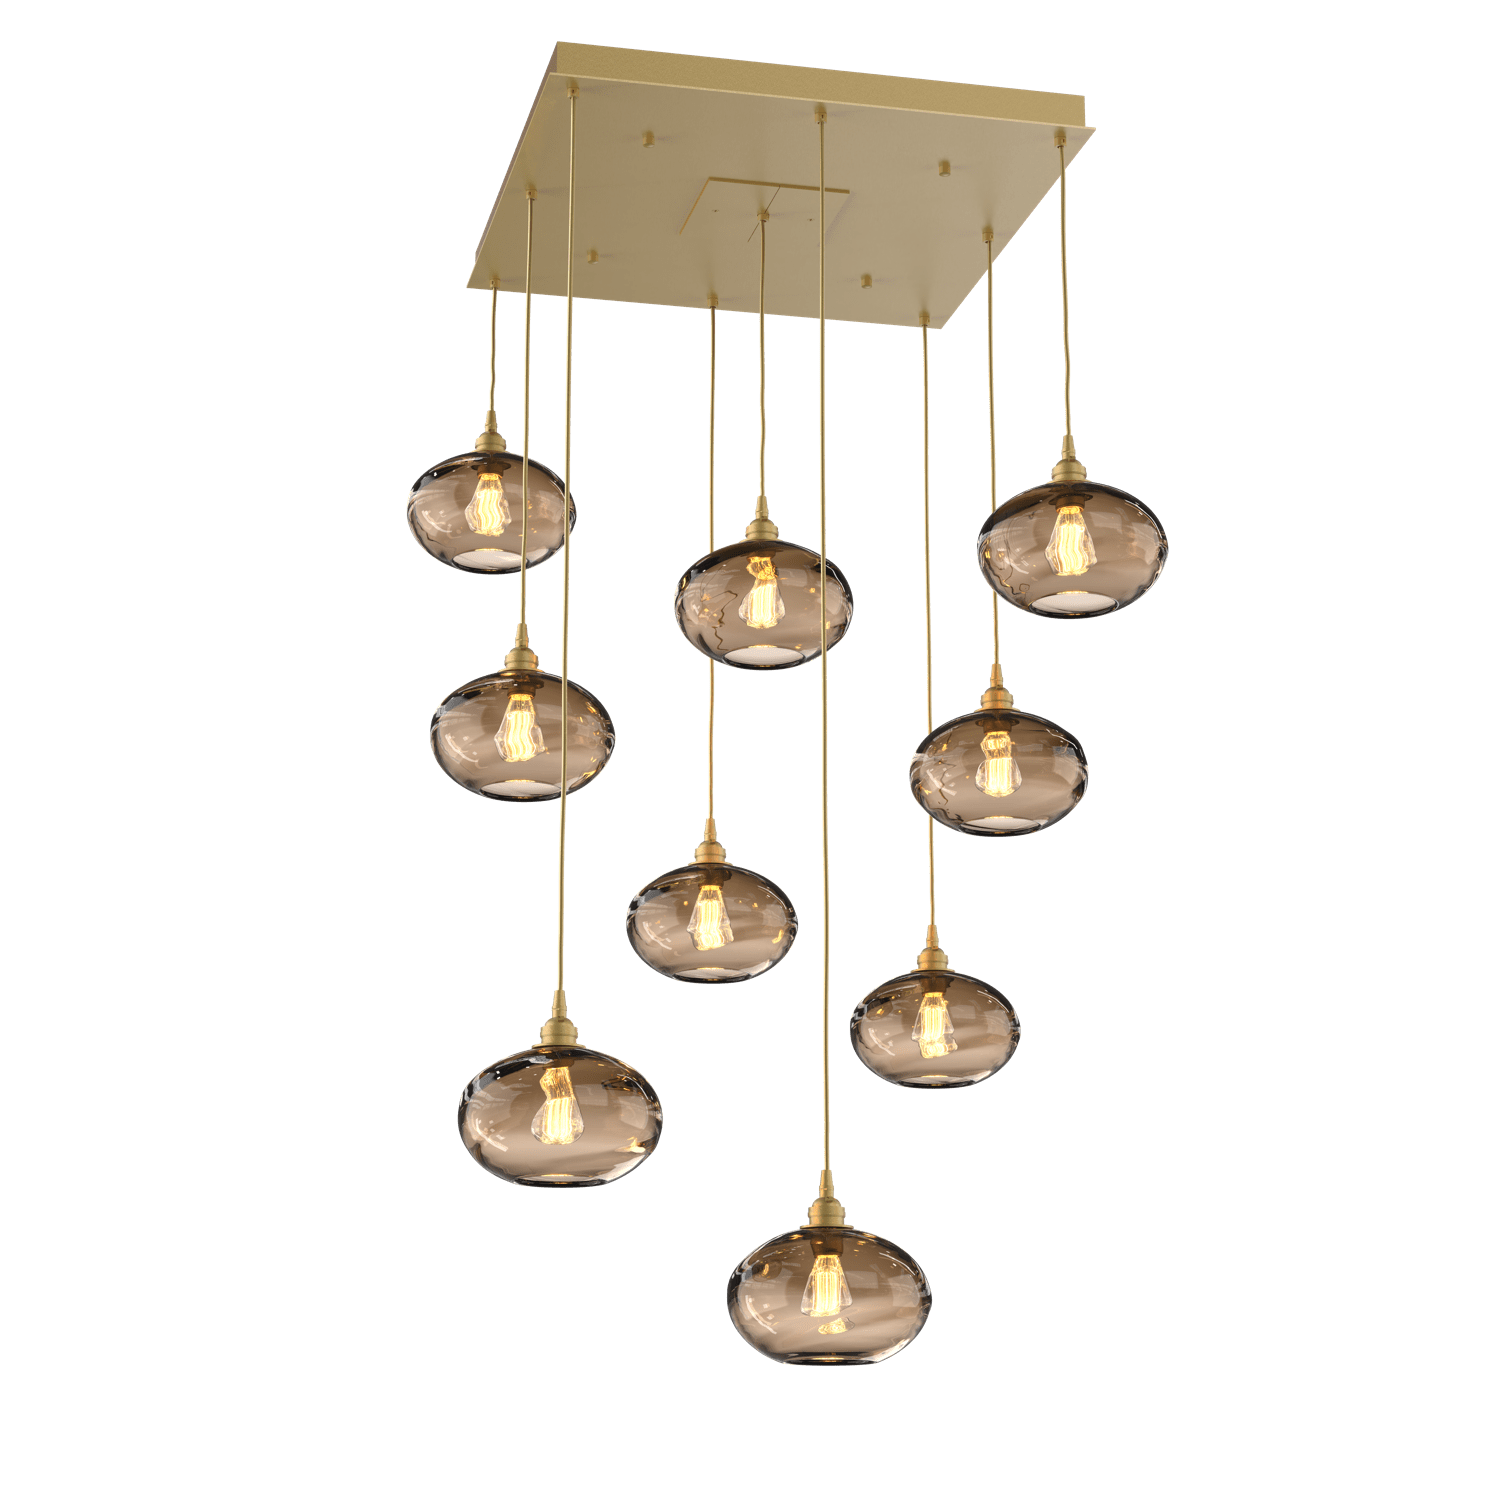 CHB0036-09-GB-OB-Hammerton-Studio-Optic-Blown-Glass-Coppa-9-light-square-pendant-chandelier-with-gilded-brass-finish-and-optic-bronze-blown-glass-shades-and-incandescent-lamping